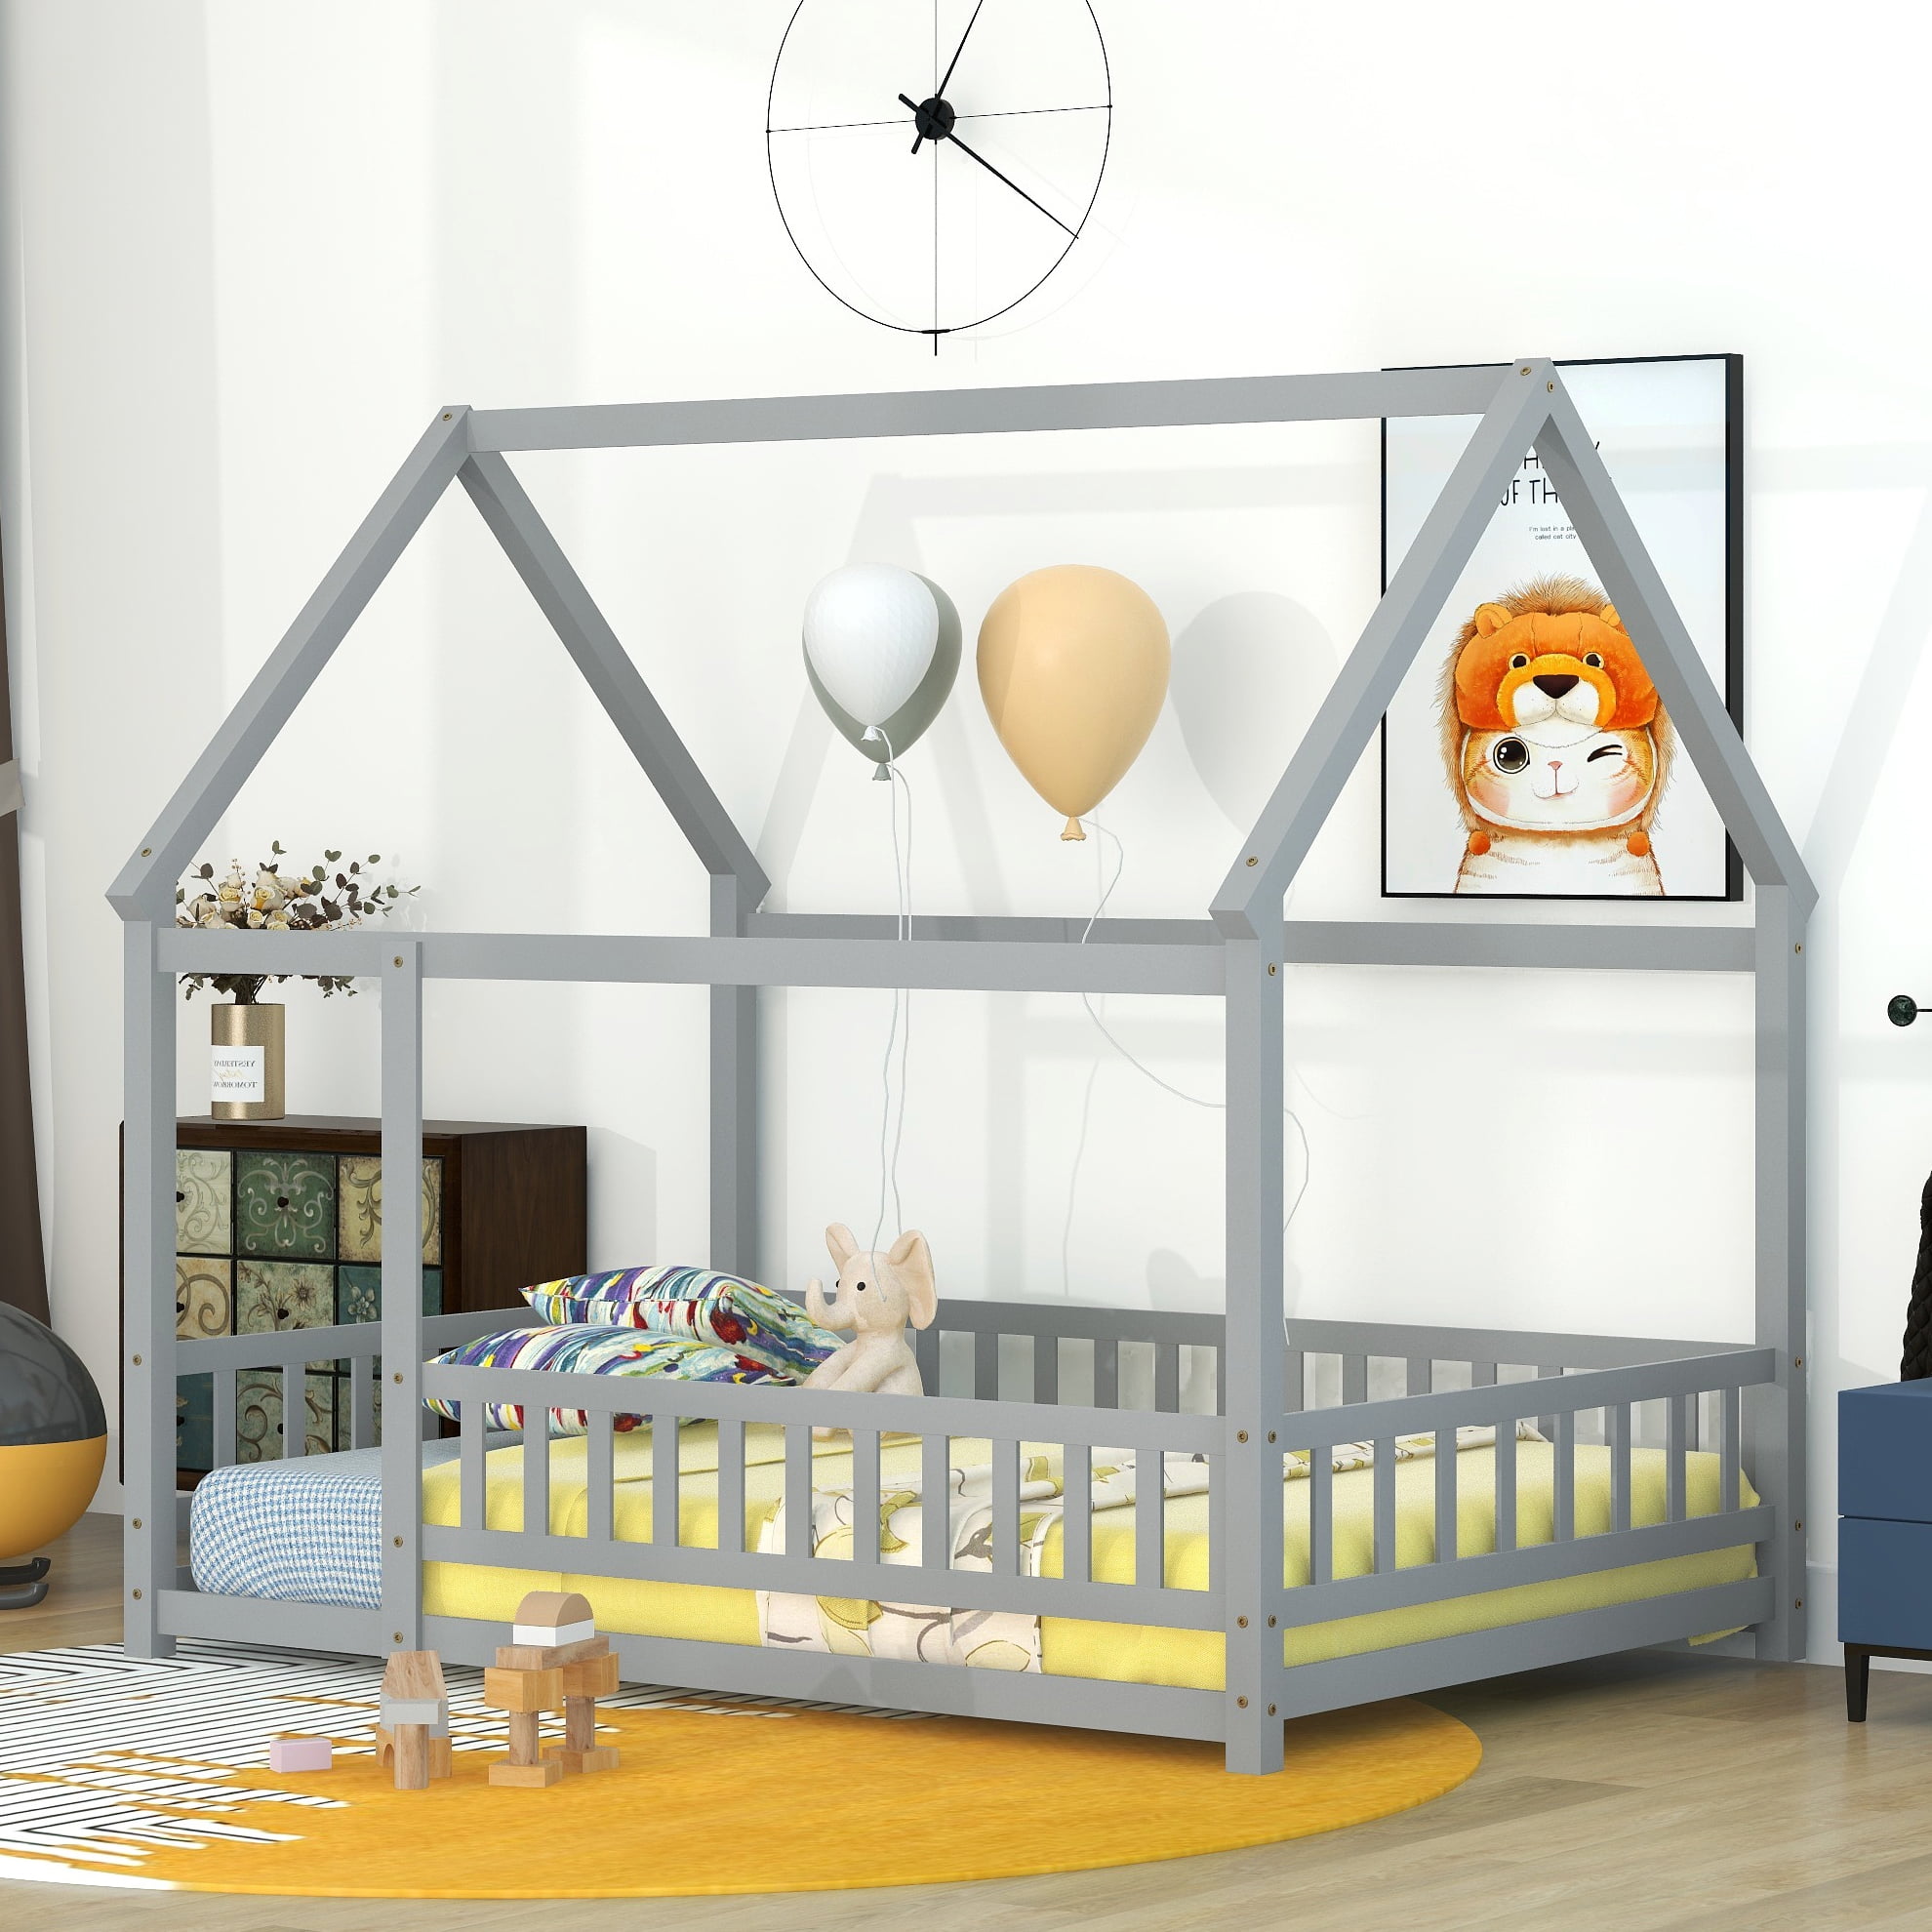 Bellemave Full Floor Bed for Kids, Wood Full Size House Bed Frame with ...